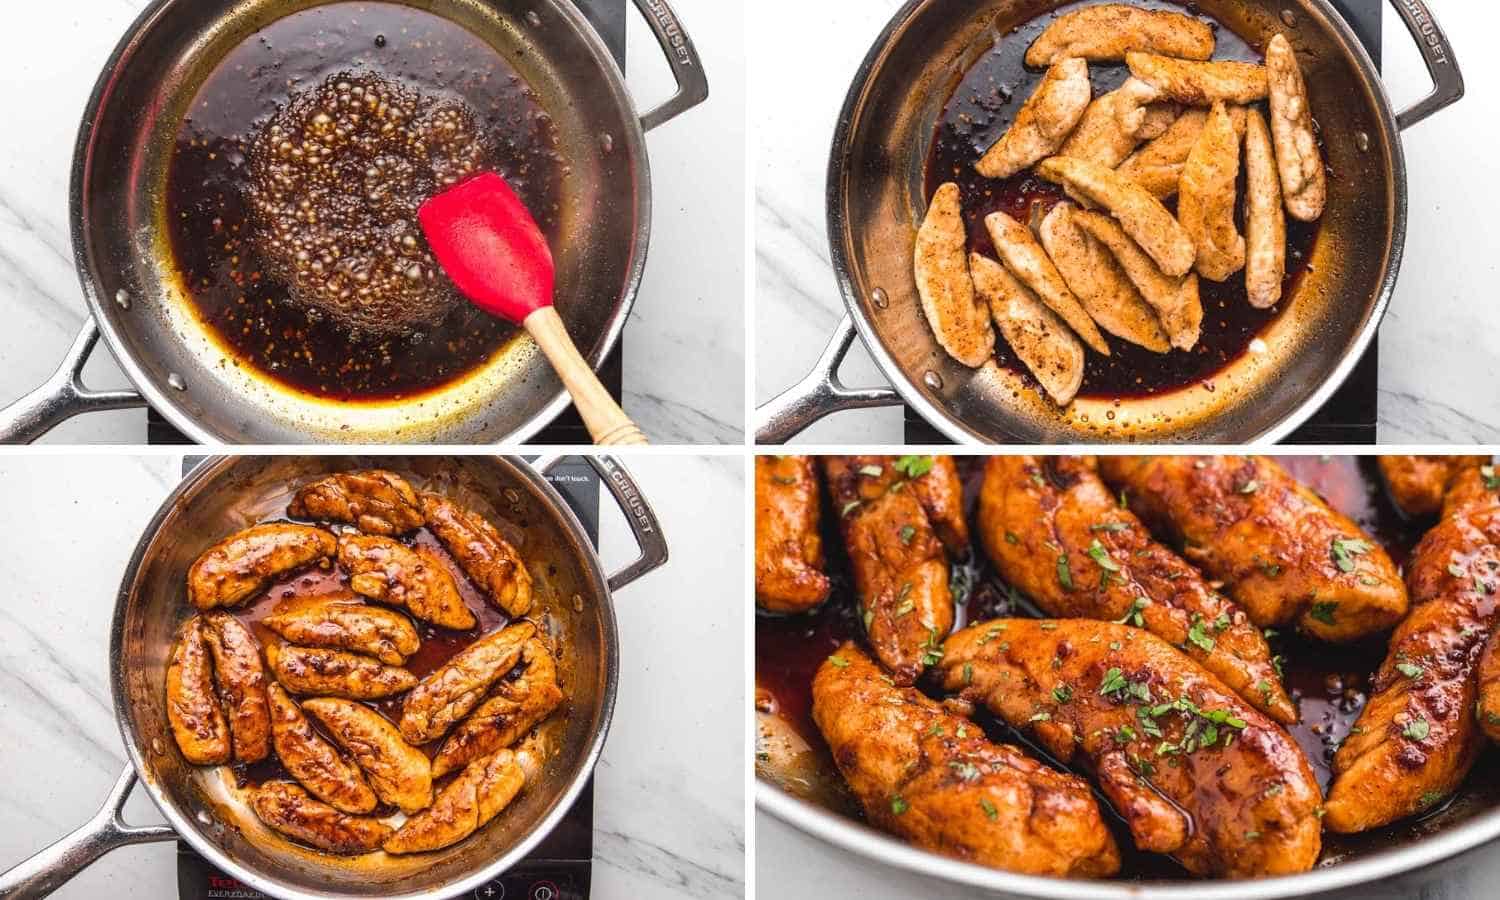 How to Make Honey Garlic sauce for Chicken Tenders shown in a collage of four images